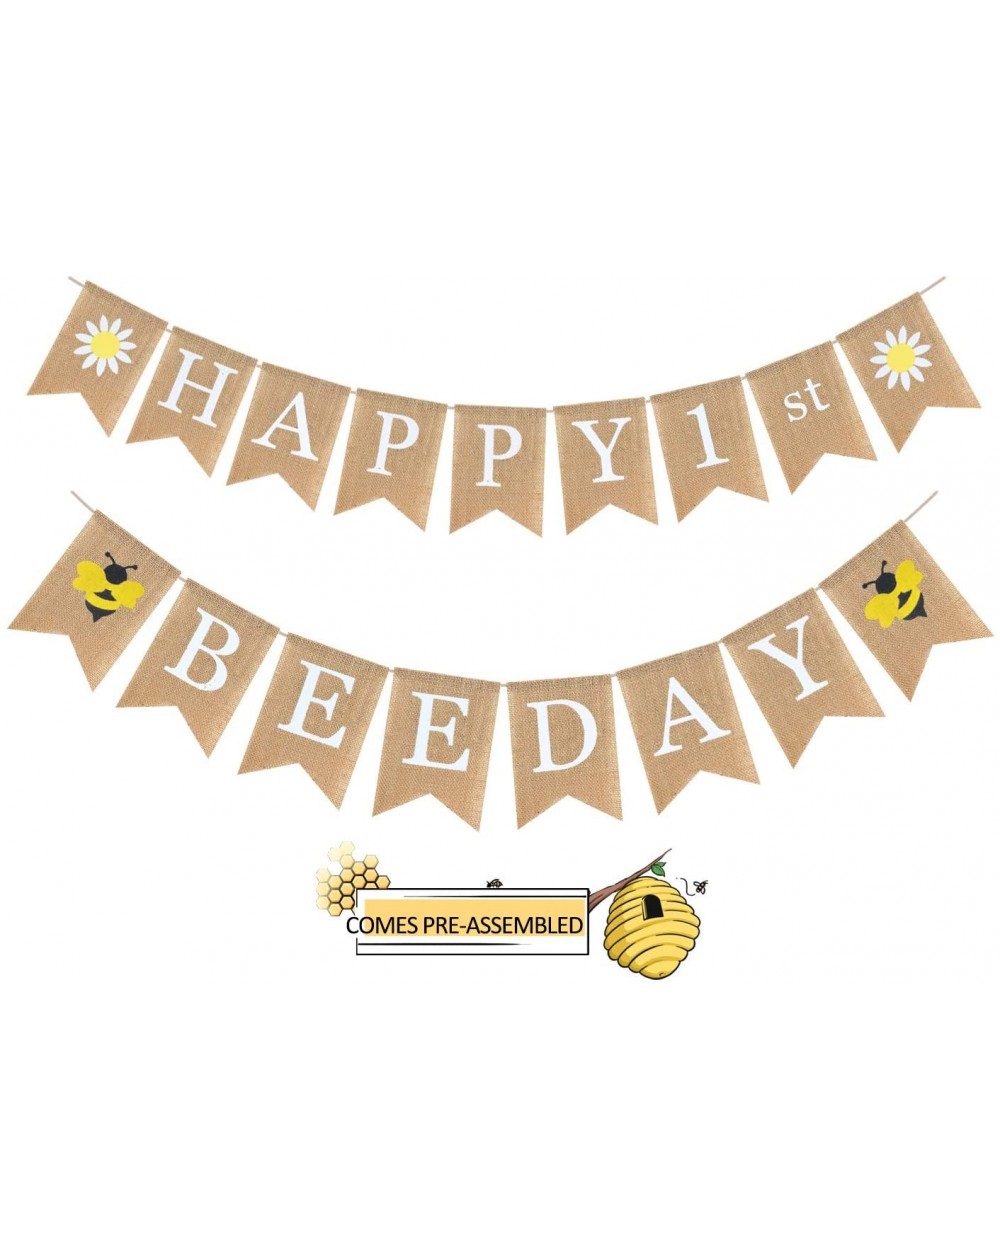 Banners Happy 1st Bee Day Jute Burlap Birthday Banner - Baby Shower First Birthday Party - Happy Bee Day Daisy Bumble Honey B...